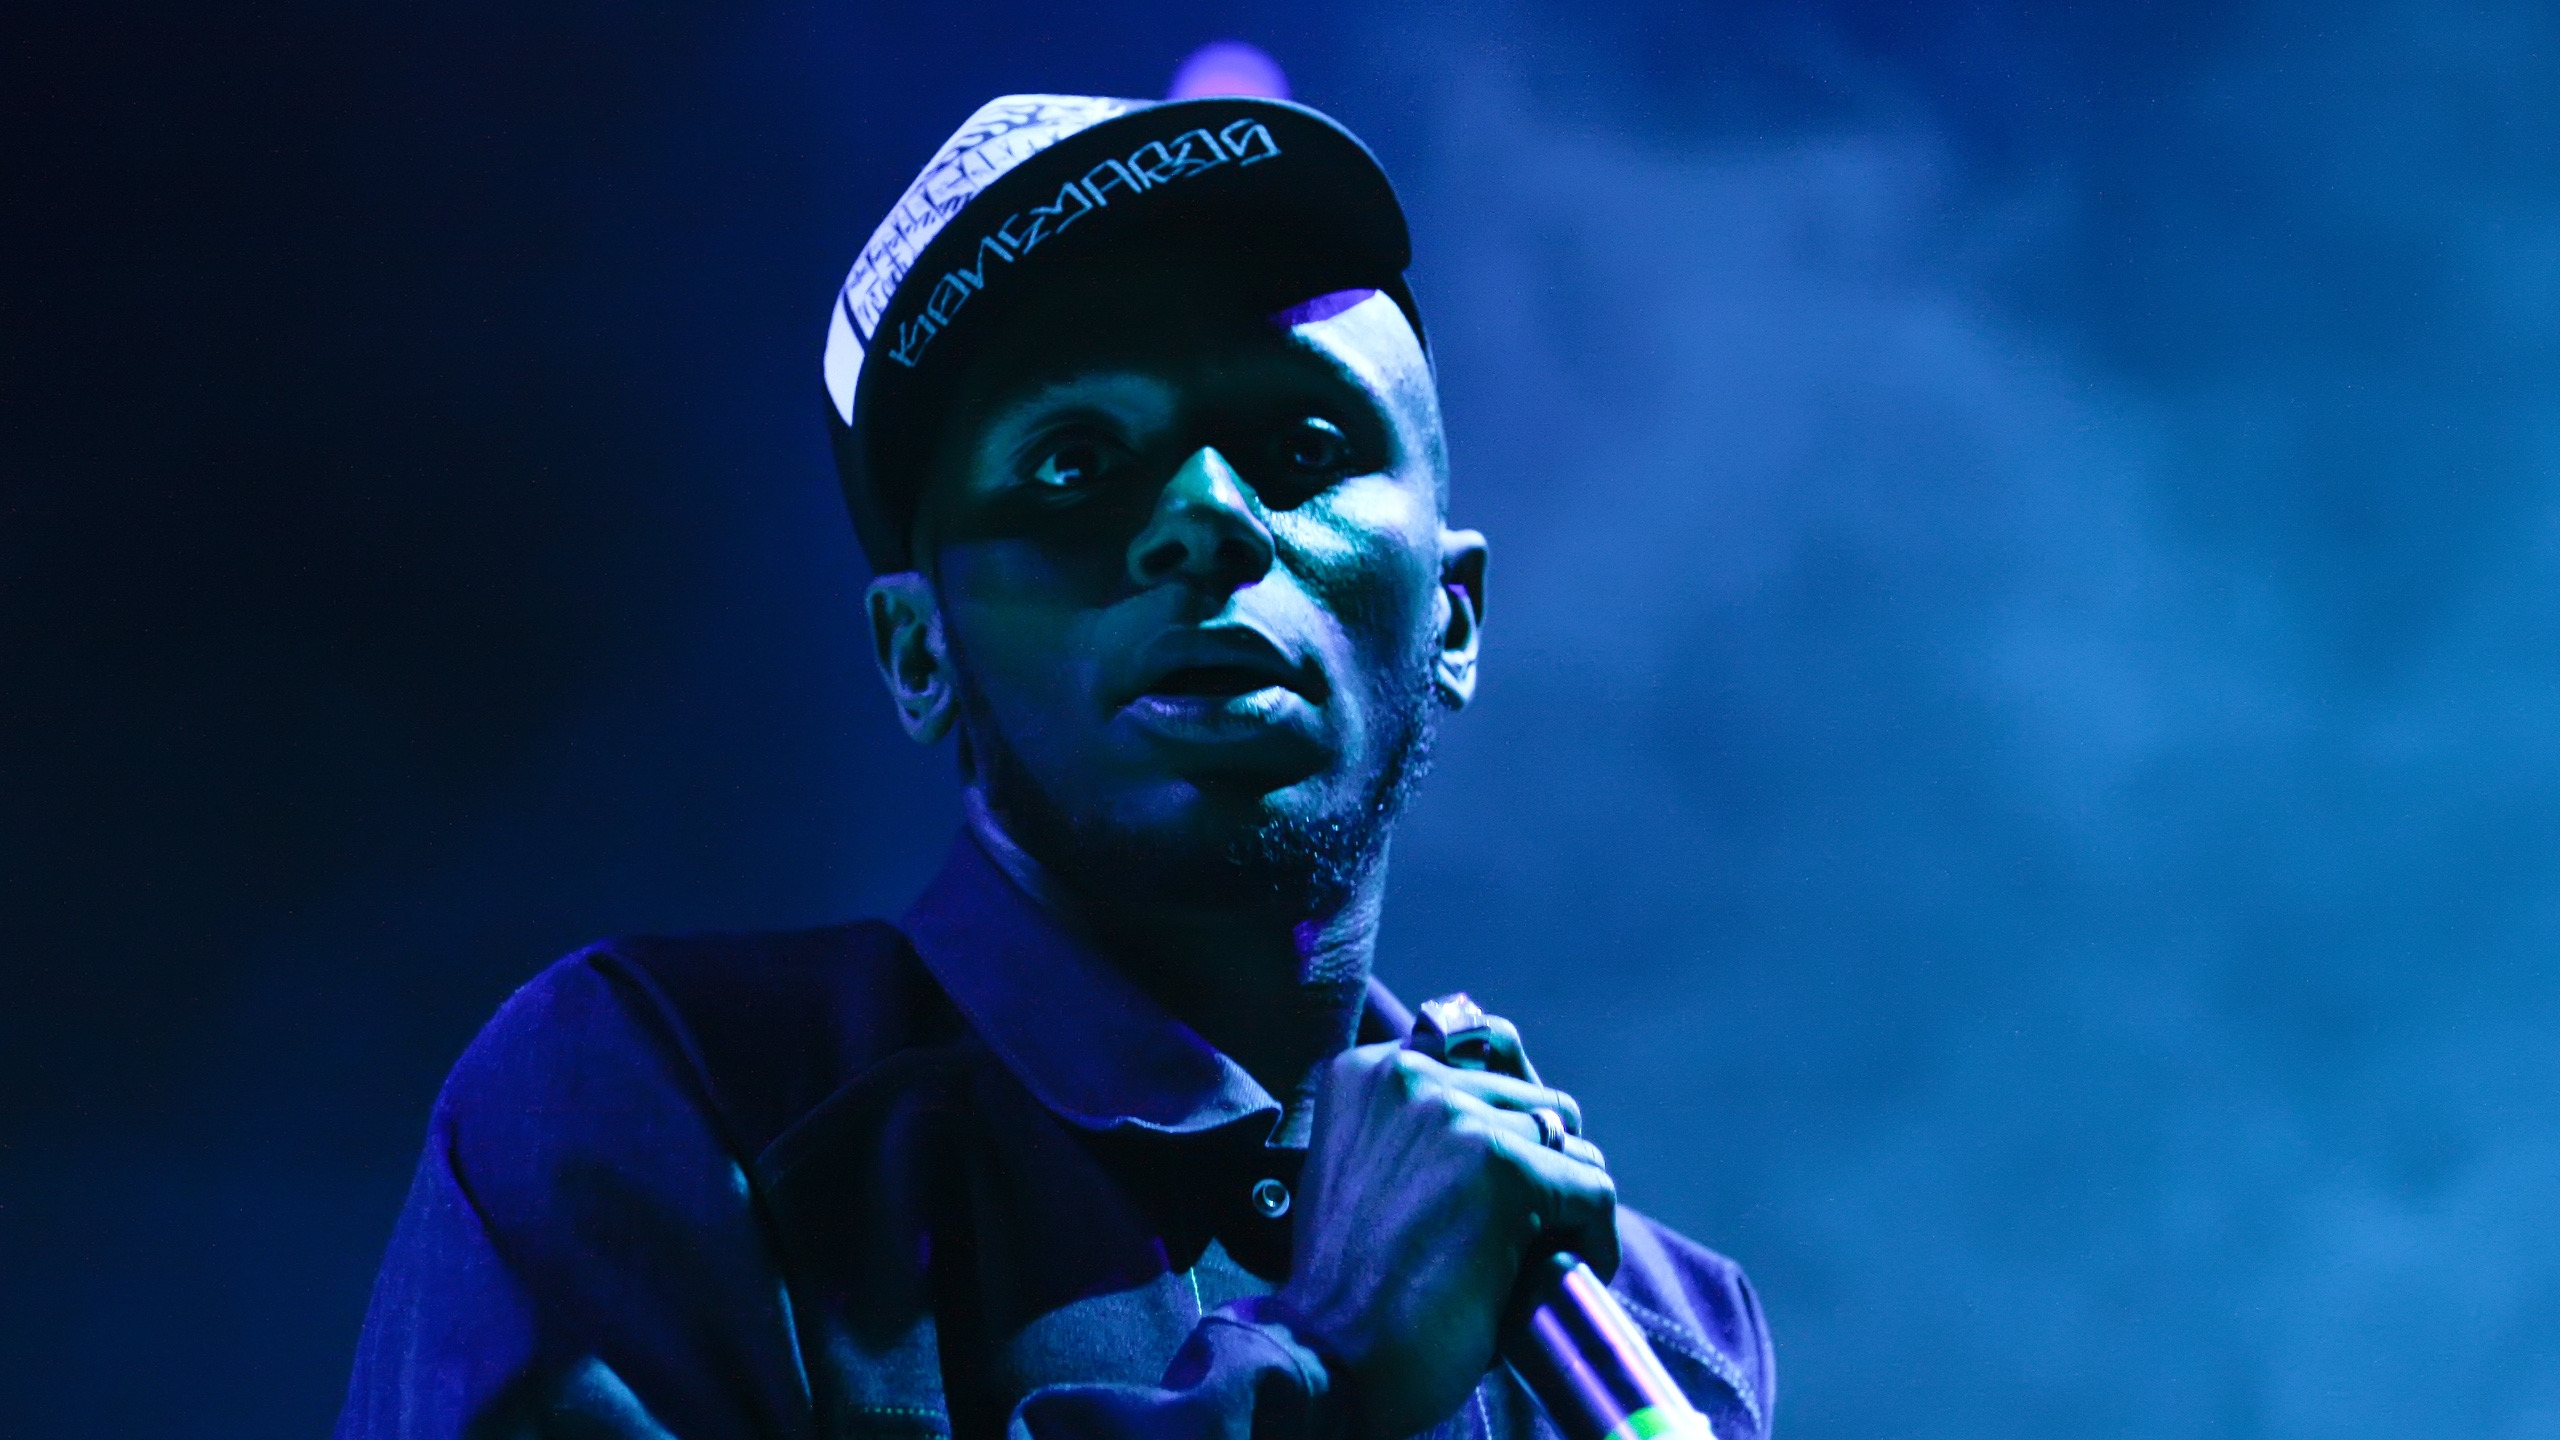 Mos Def for 2560x1440 HDTV resolution